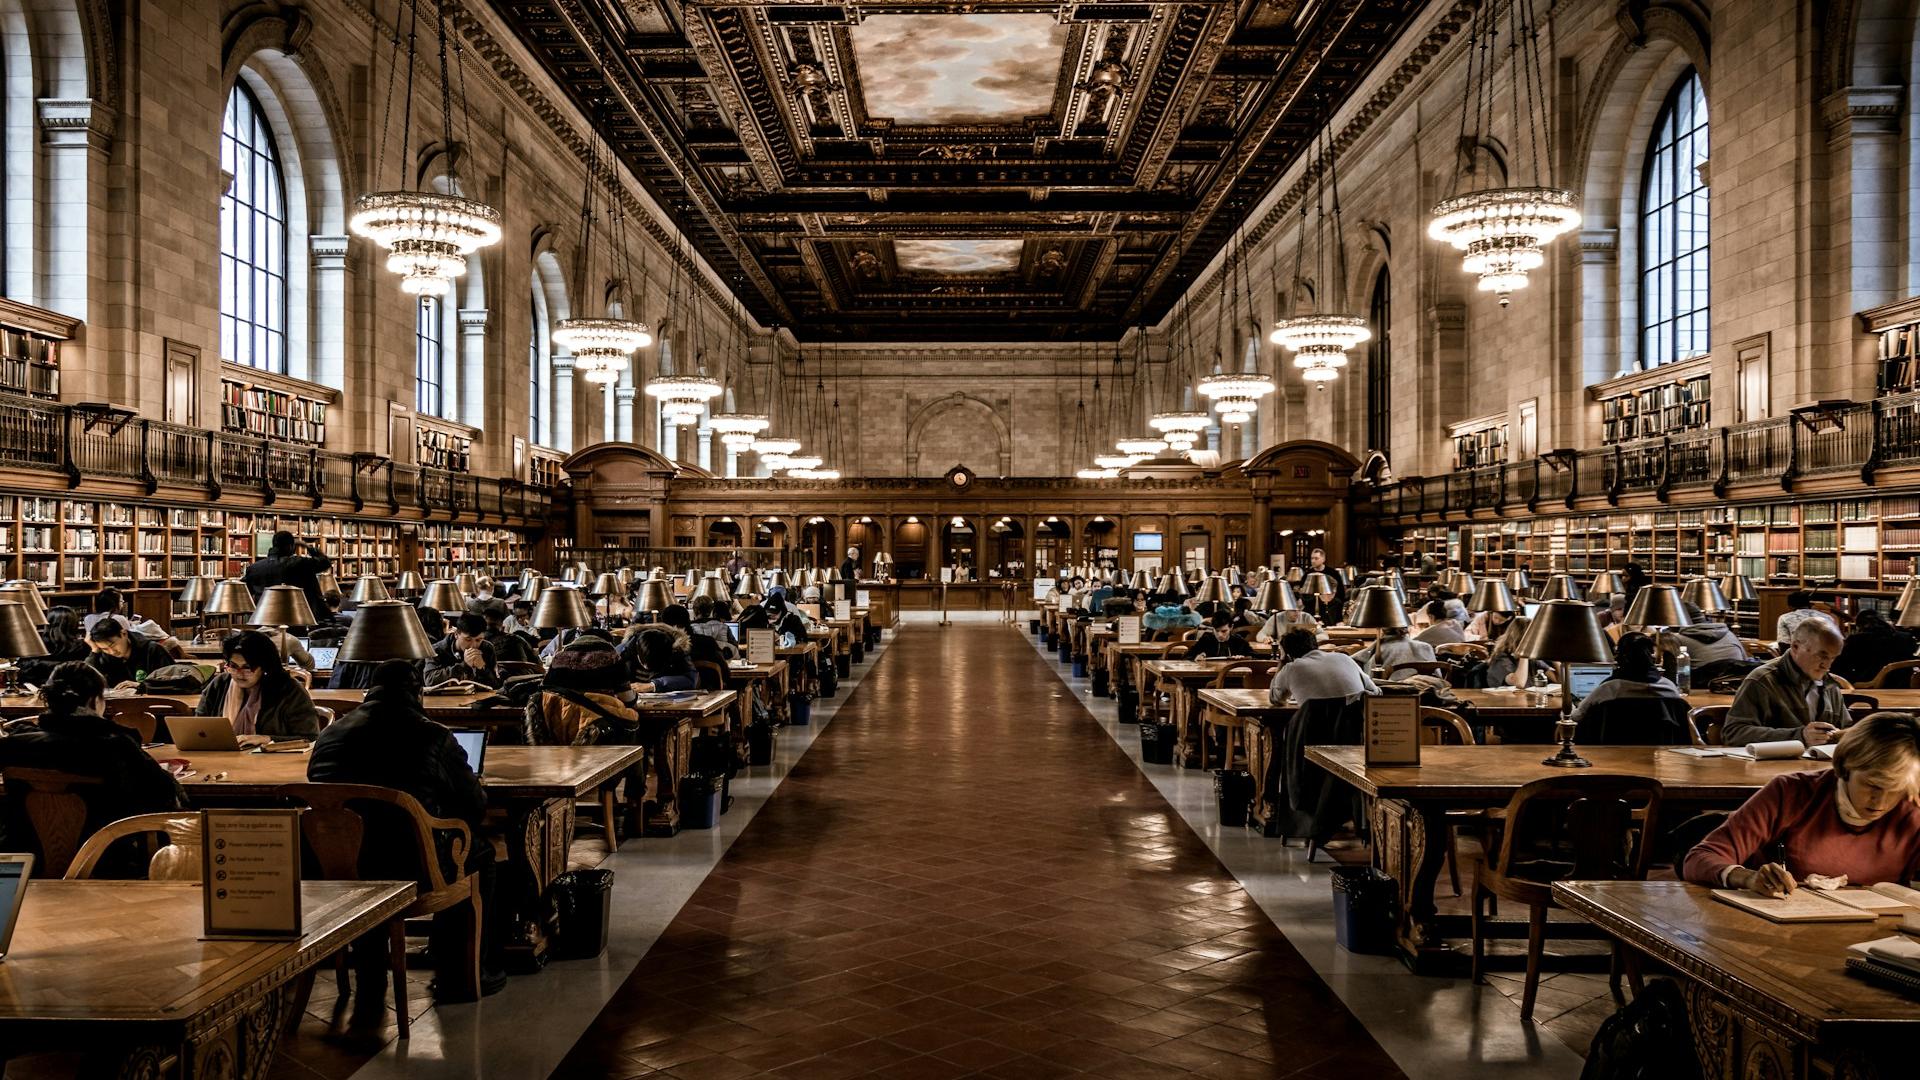 The Rose Main Reading Room at the Stephen A. Schwarzman Building (also known as New York Public Library Main Branch) is an elegant study hall in the heart of Manhattan. 